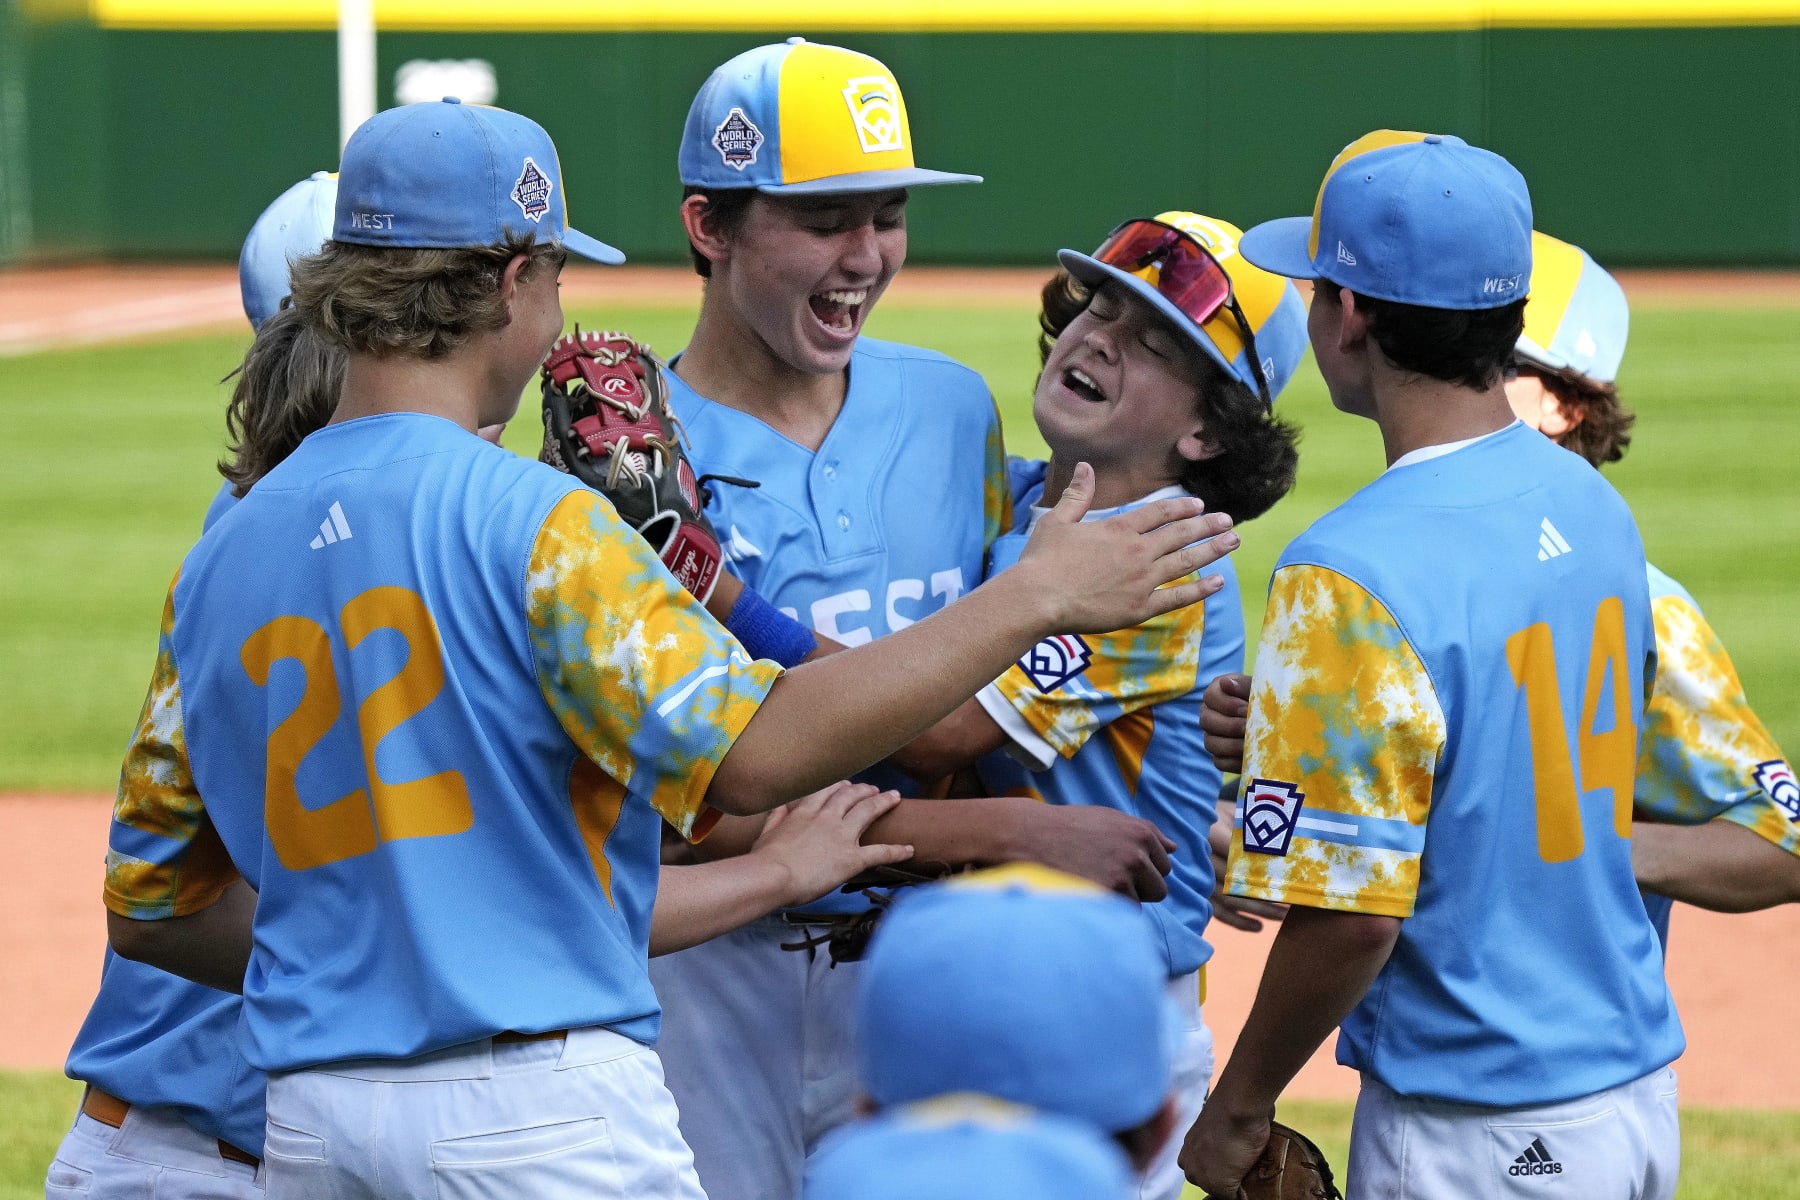 California Wows Fans with Walk-Off HR in 2023 LLWS World